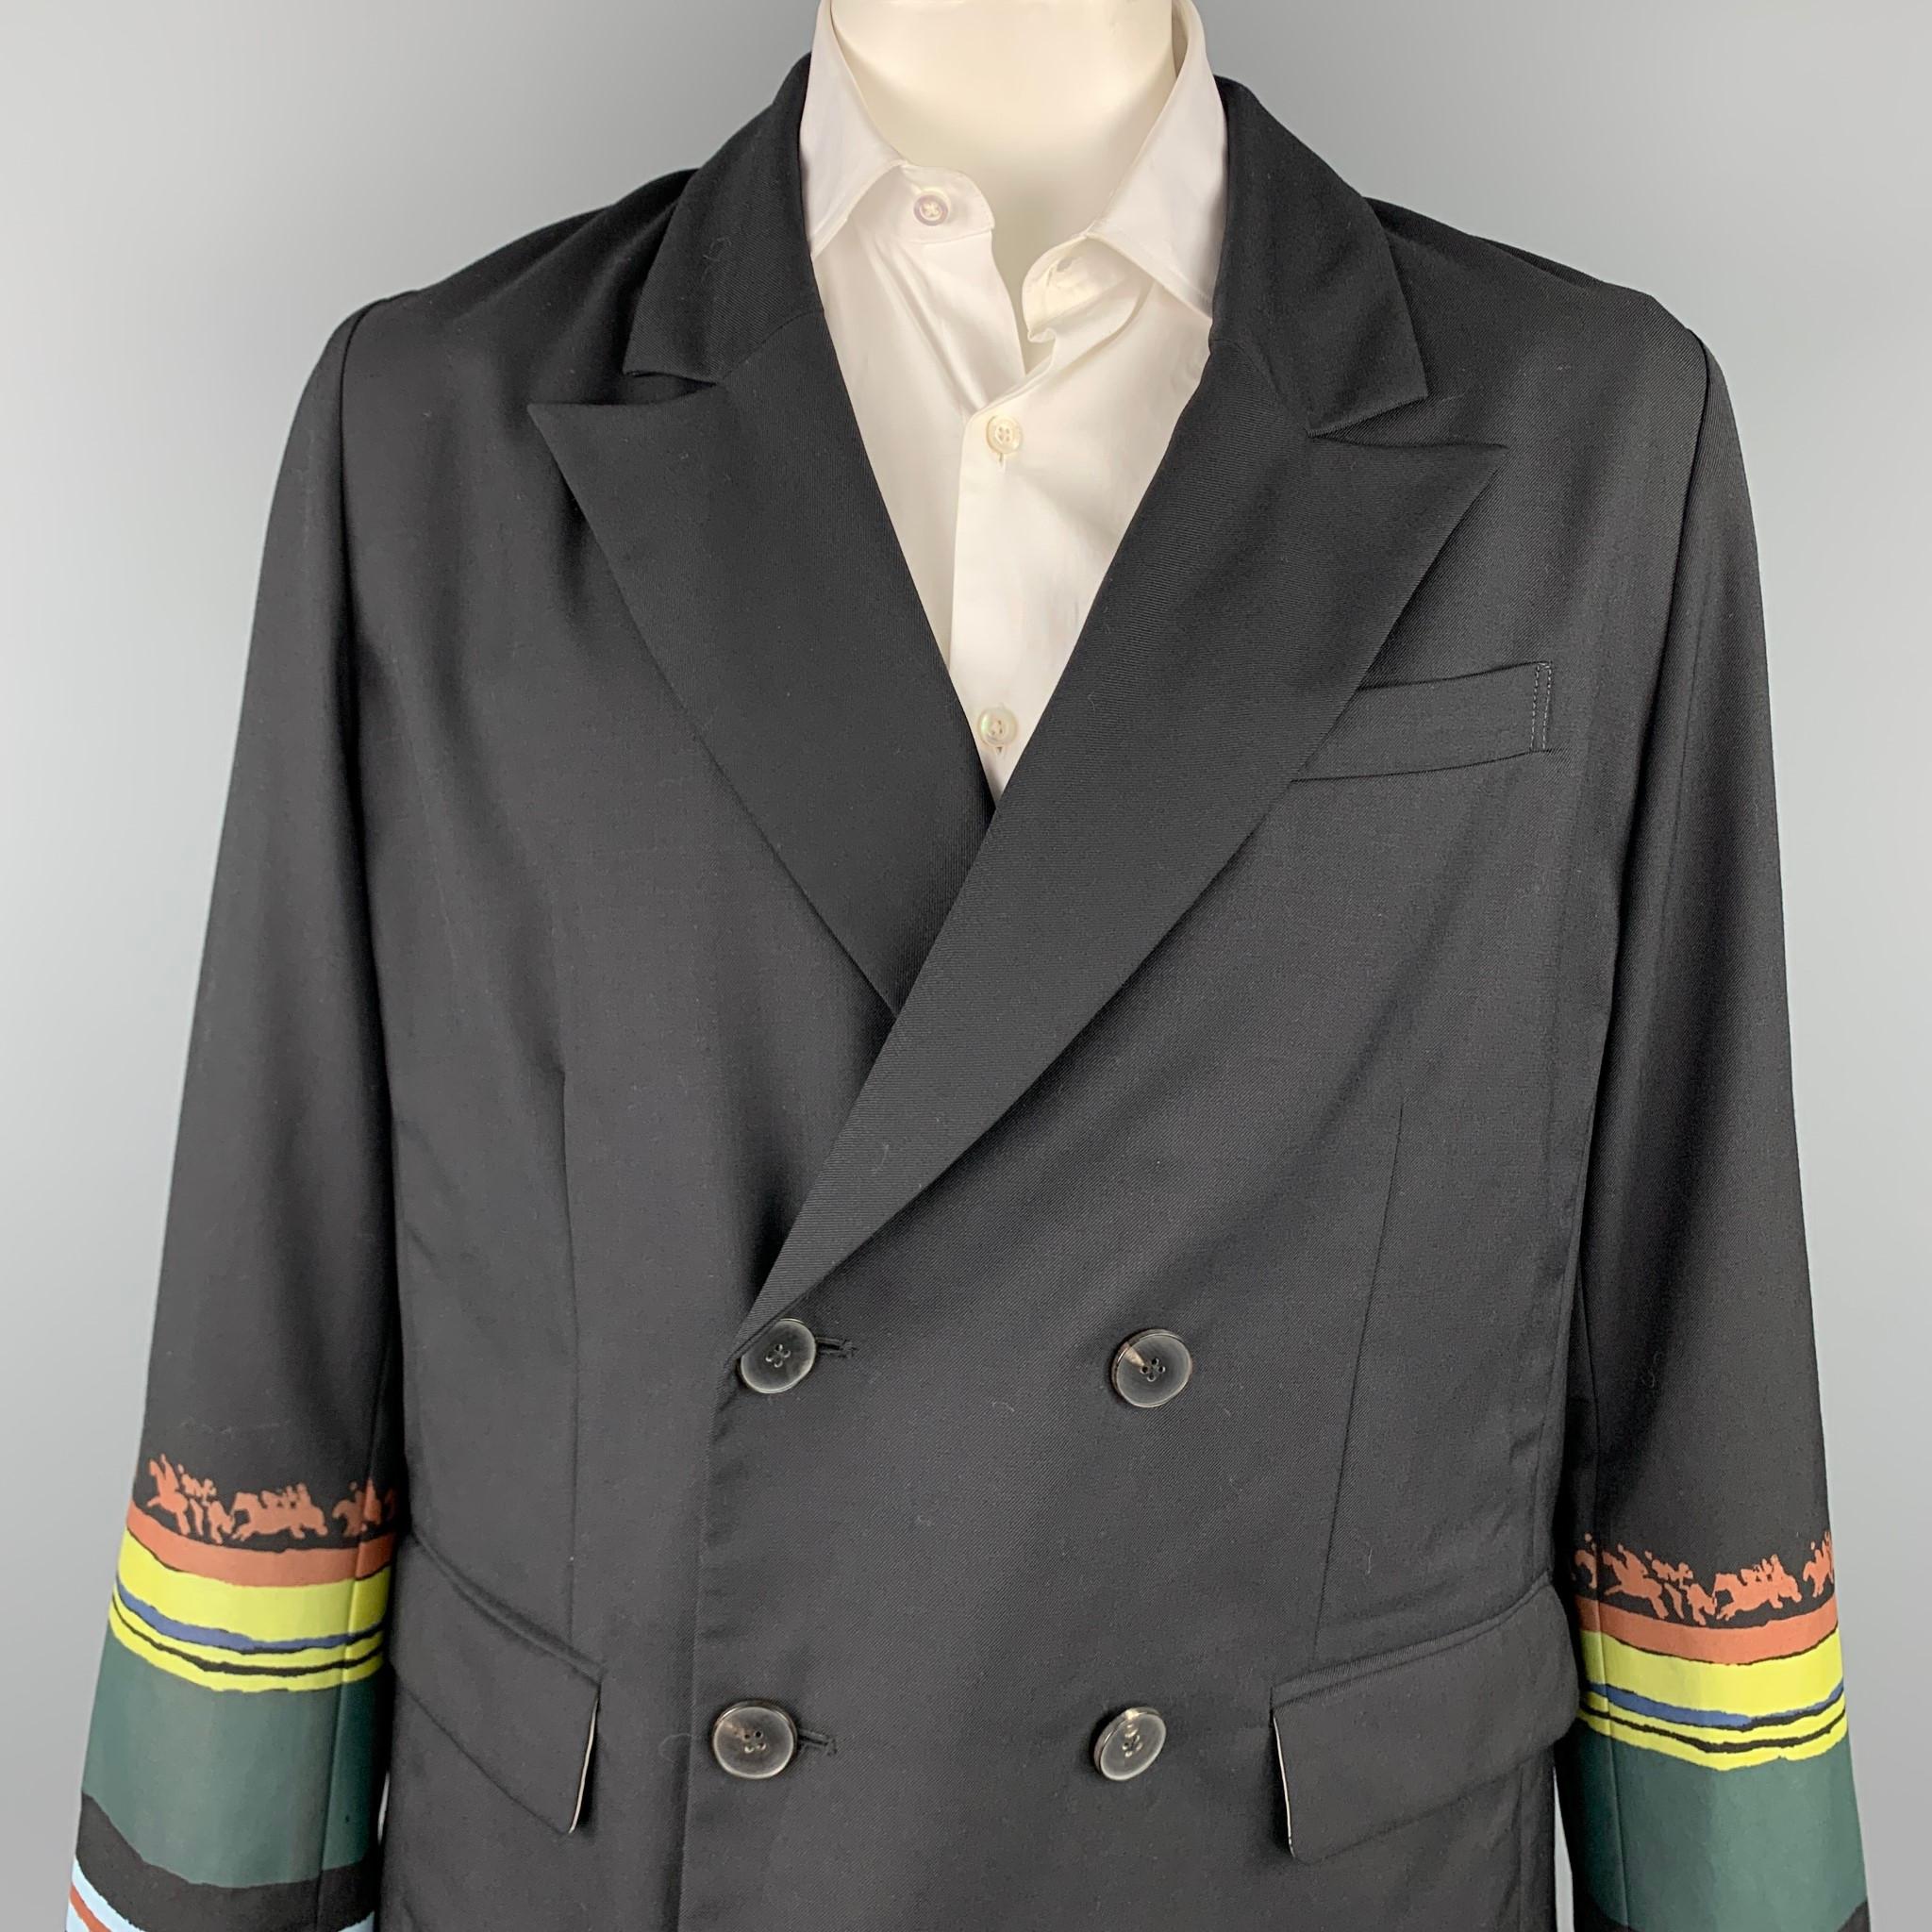 LINDER sport coat comes in a black wool / polyester with a striped trim sleeve detail featuring a peak lapel, flap pockets, and a double breasted closure. Made in USA.

New With Tags. 
Marked: 50
Original Retail Price: